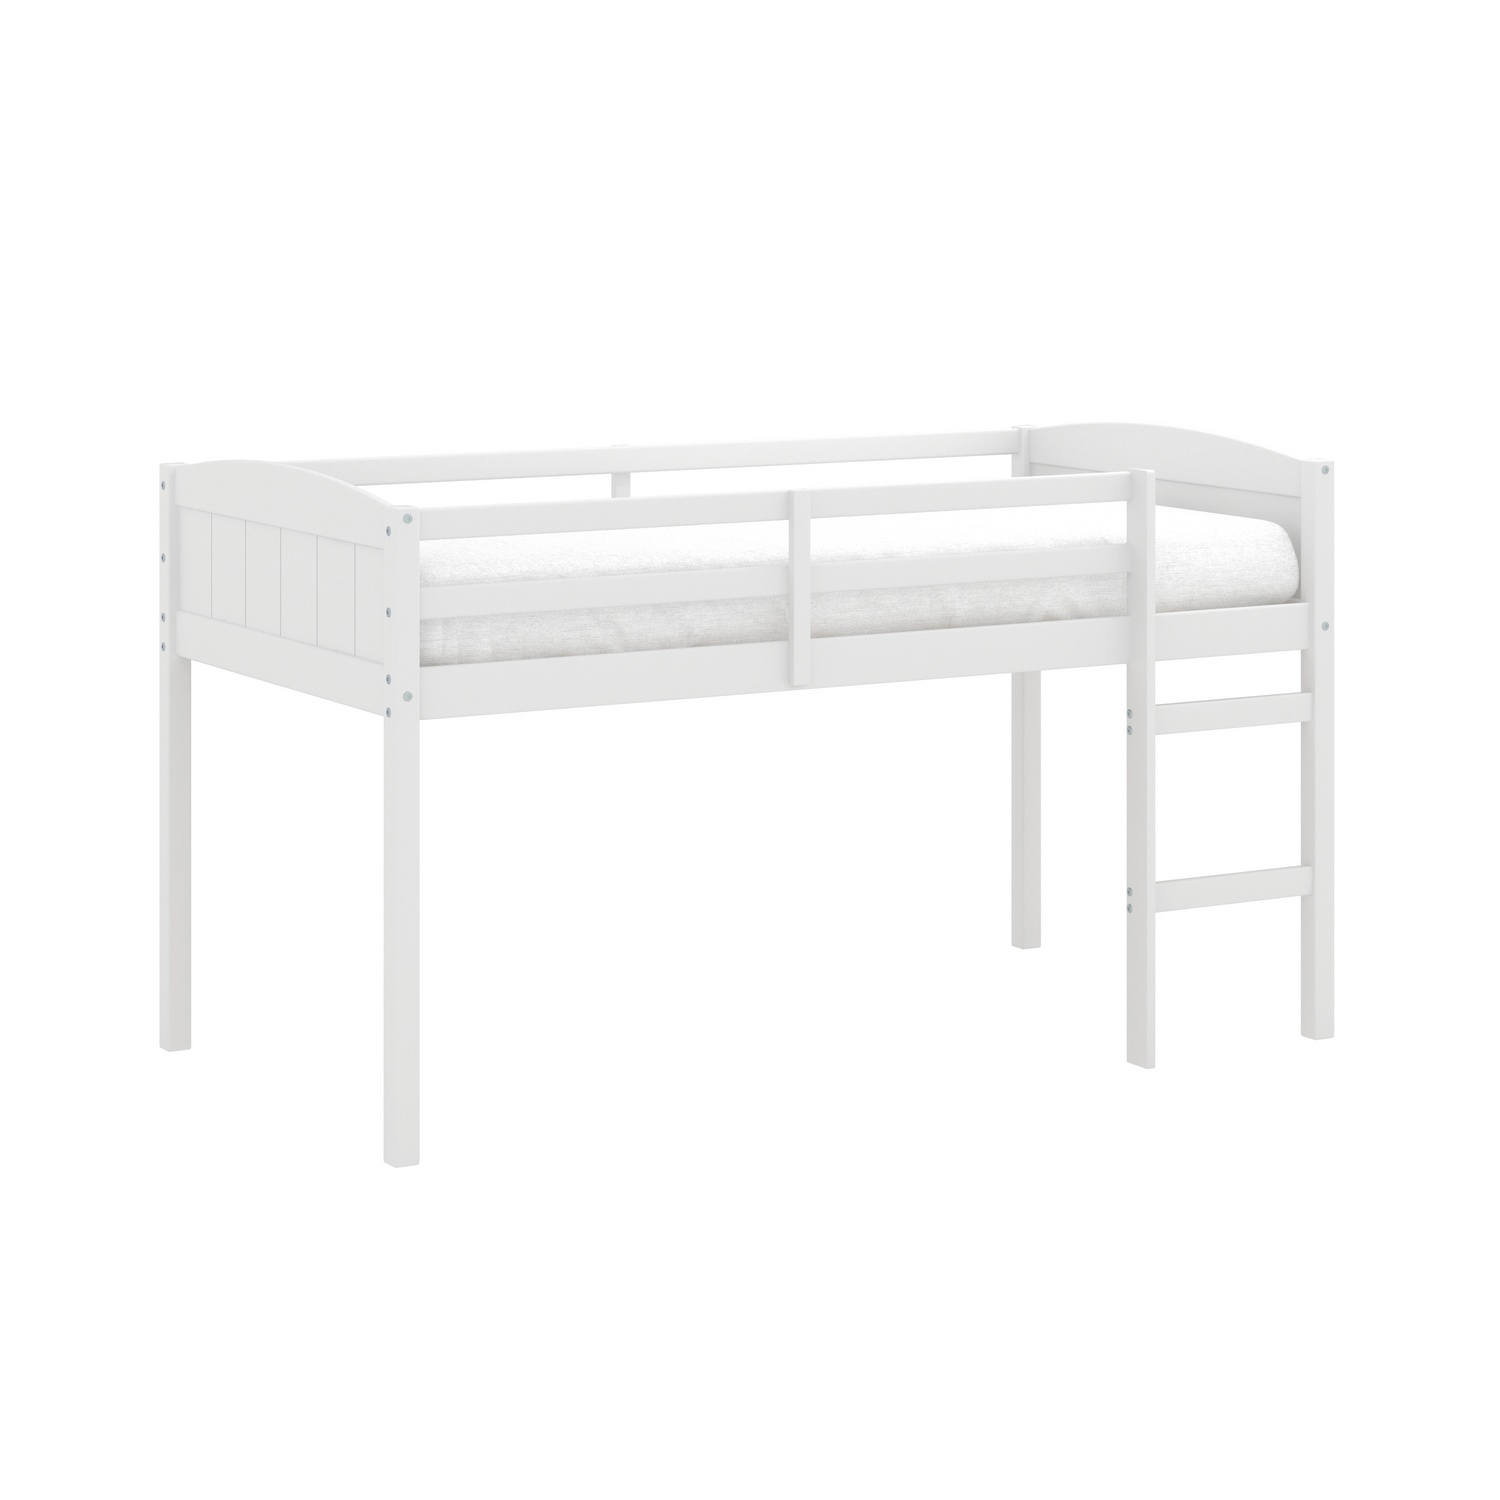 Hillsdale Alexis Wood Arch Twin Loft Bed - White